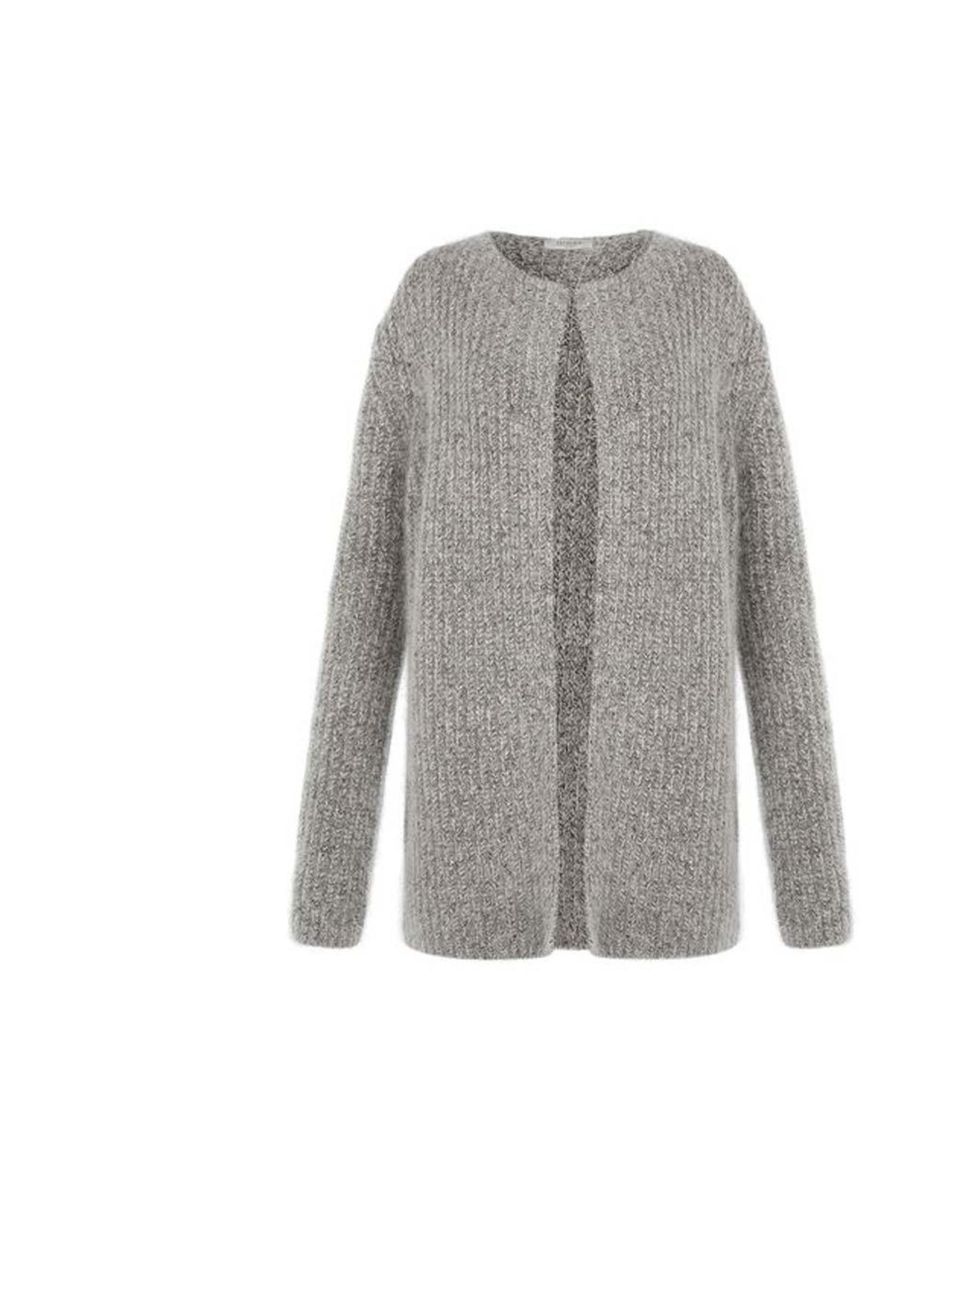 <p>A grey over-sized cardigan is a great option for layering. It can easily go on top of your shirt without hiding it.</p><p>This one is from <a href="http://www.hobbs.co.uk/product/display?productID=0213-9000-9044K00&amp;productvarid=0213-9000-9044K00-GR